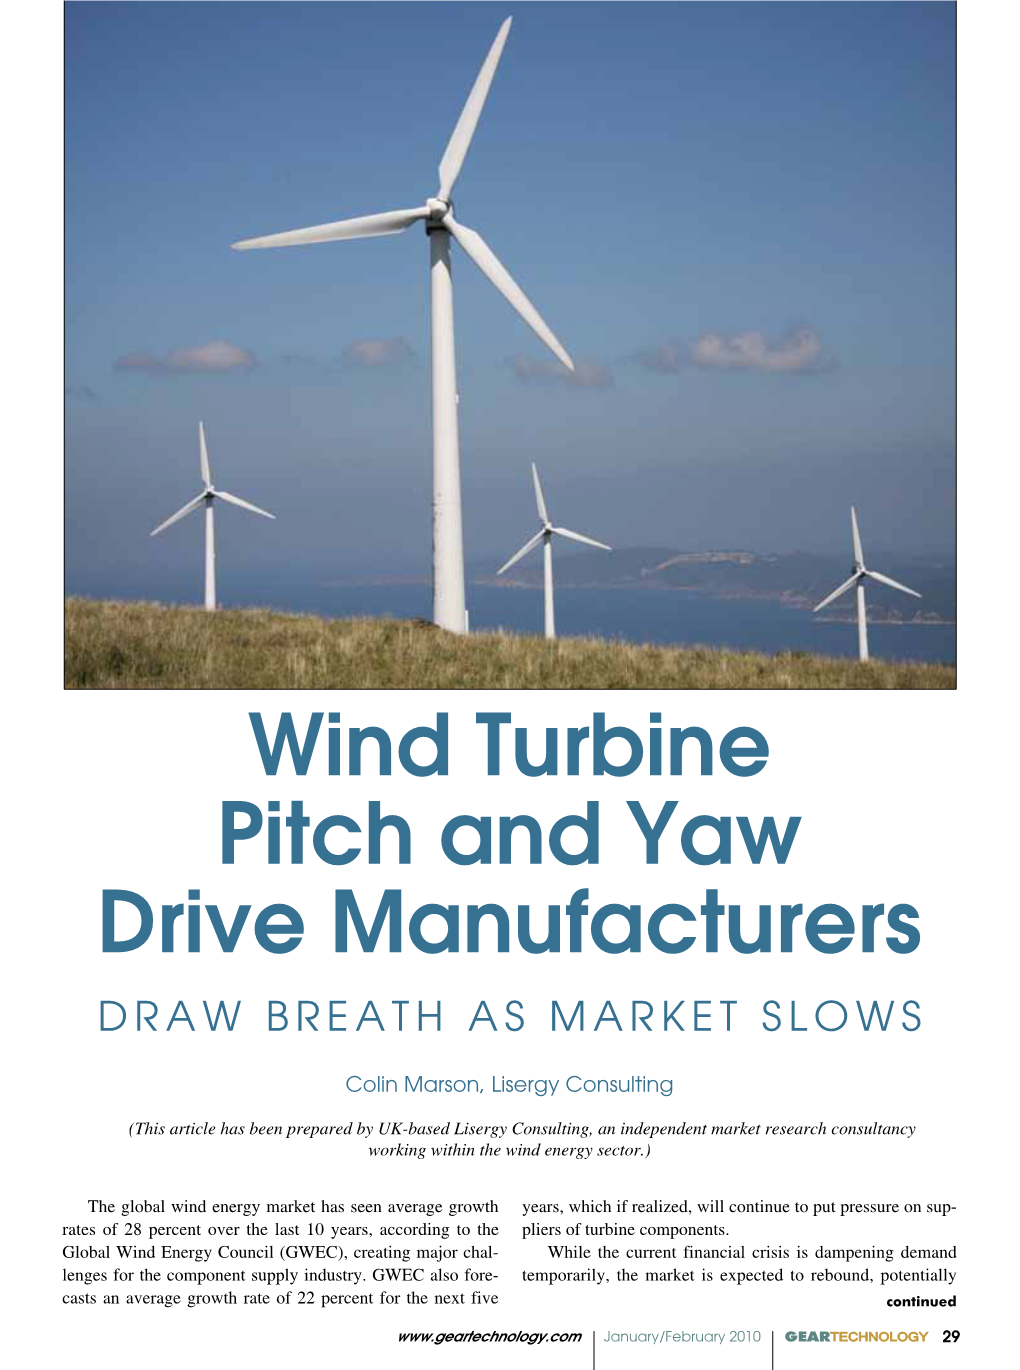 Wind Turbine Pitch and Yaw Drive Manufacturers Draw Breath As